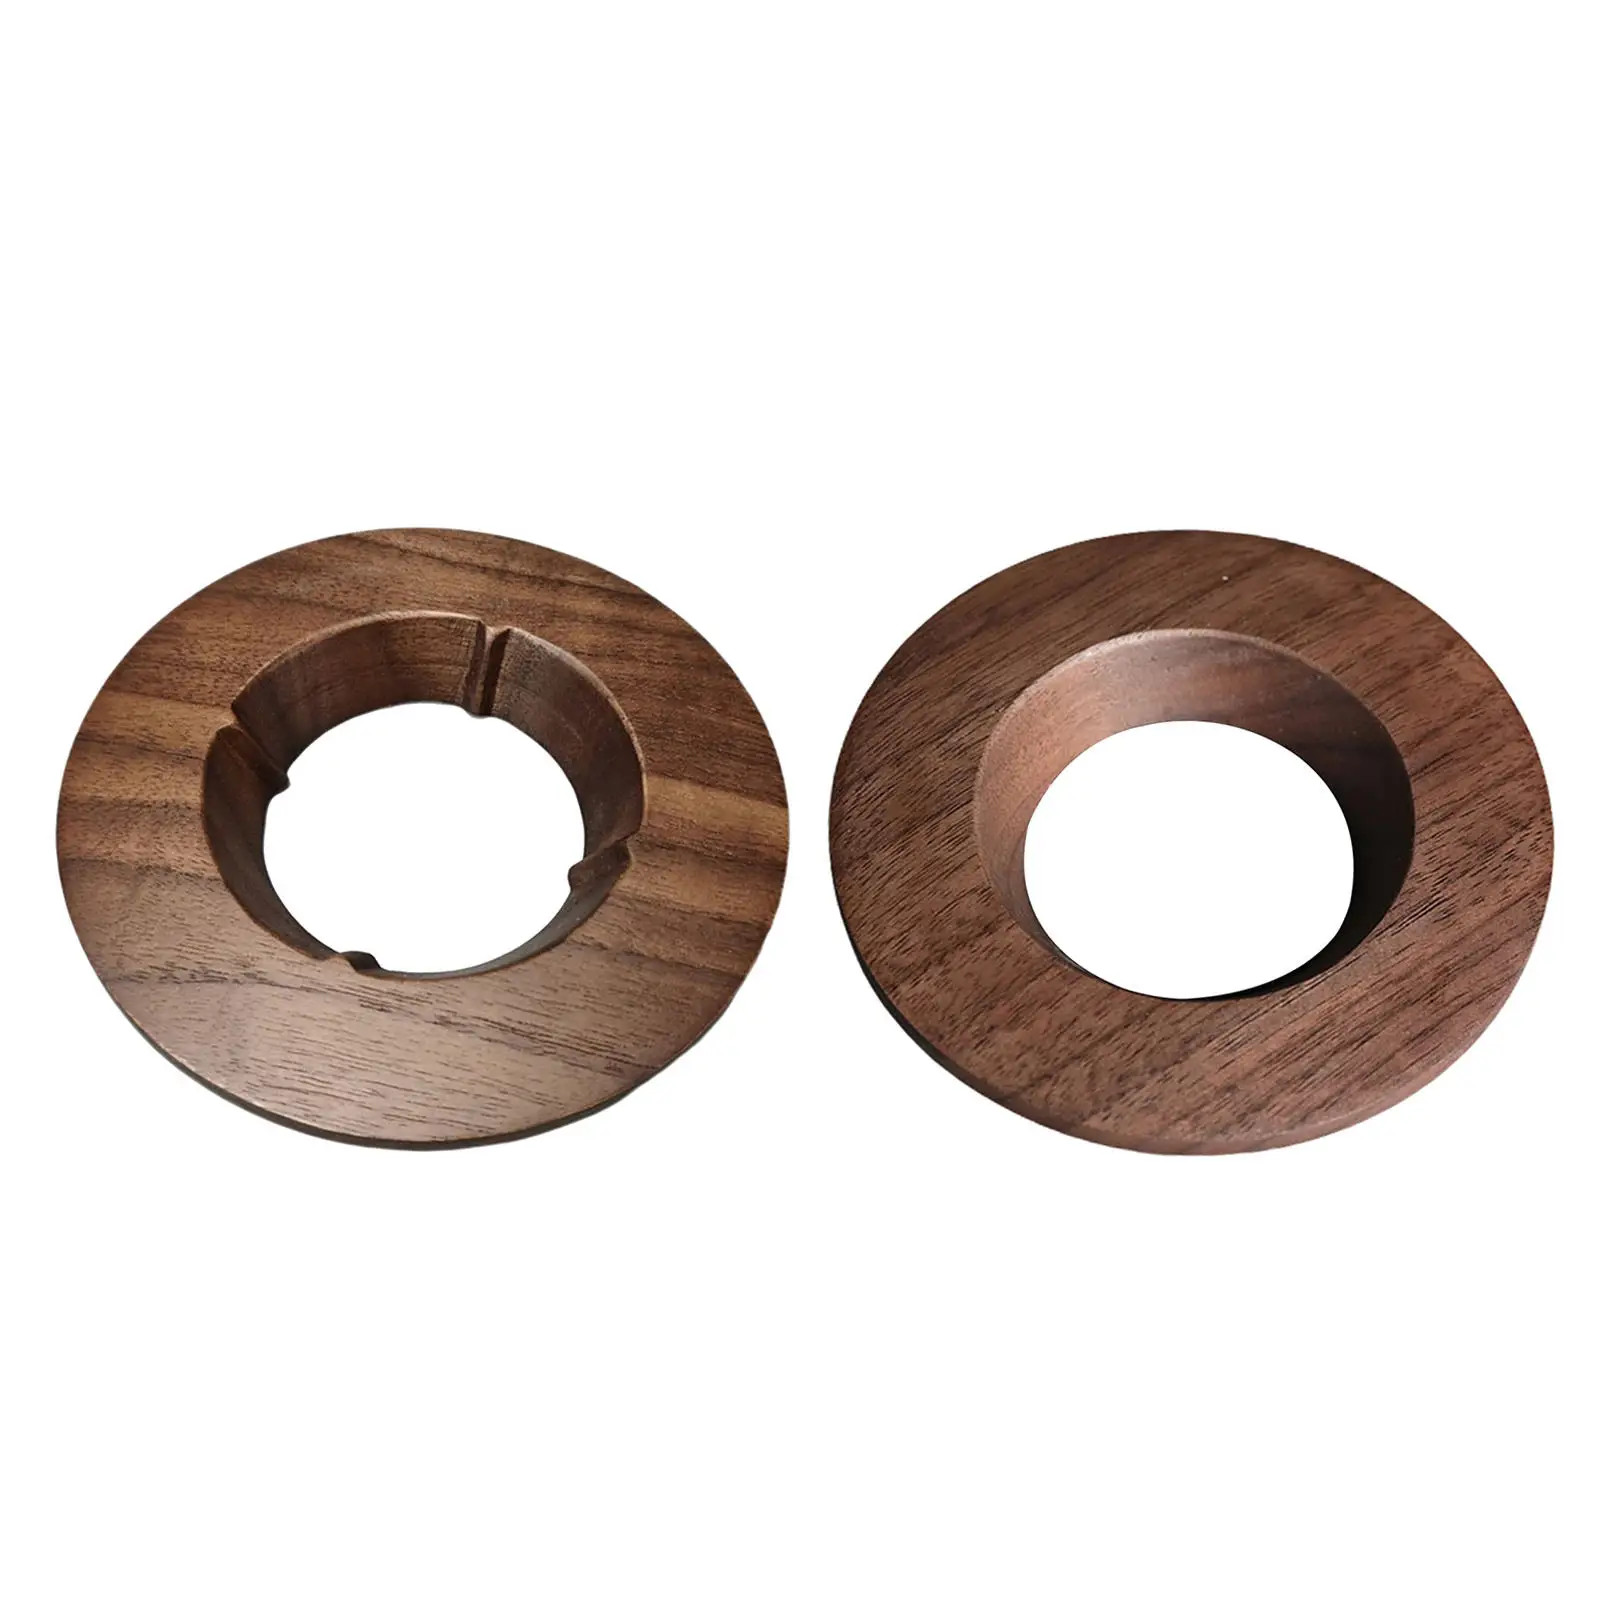 Wooden Pour Over Coffee Filter Stand Cone Dripper Holder 110mm Outer Diameter, 65mm Inner Diameter